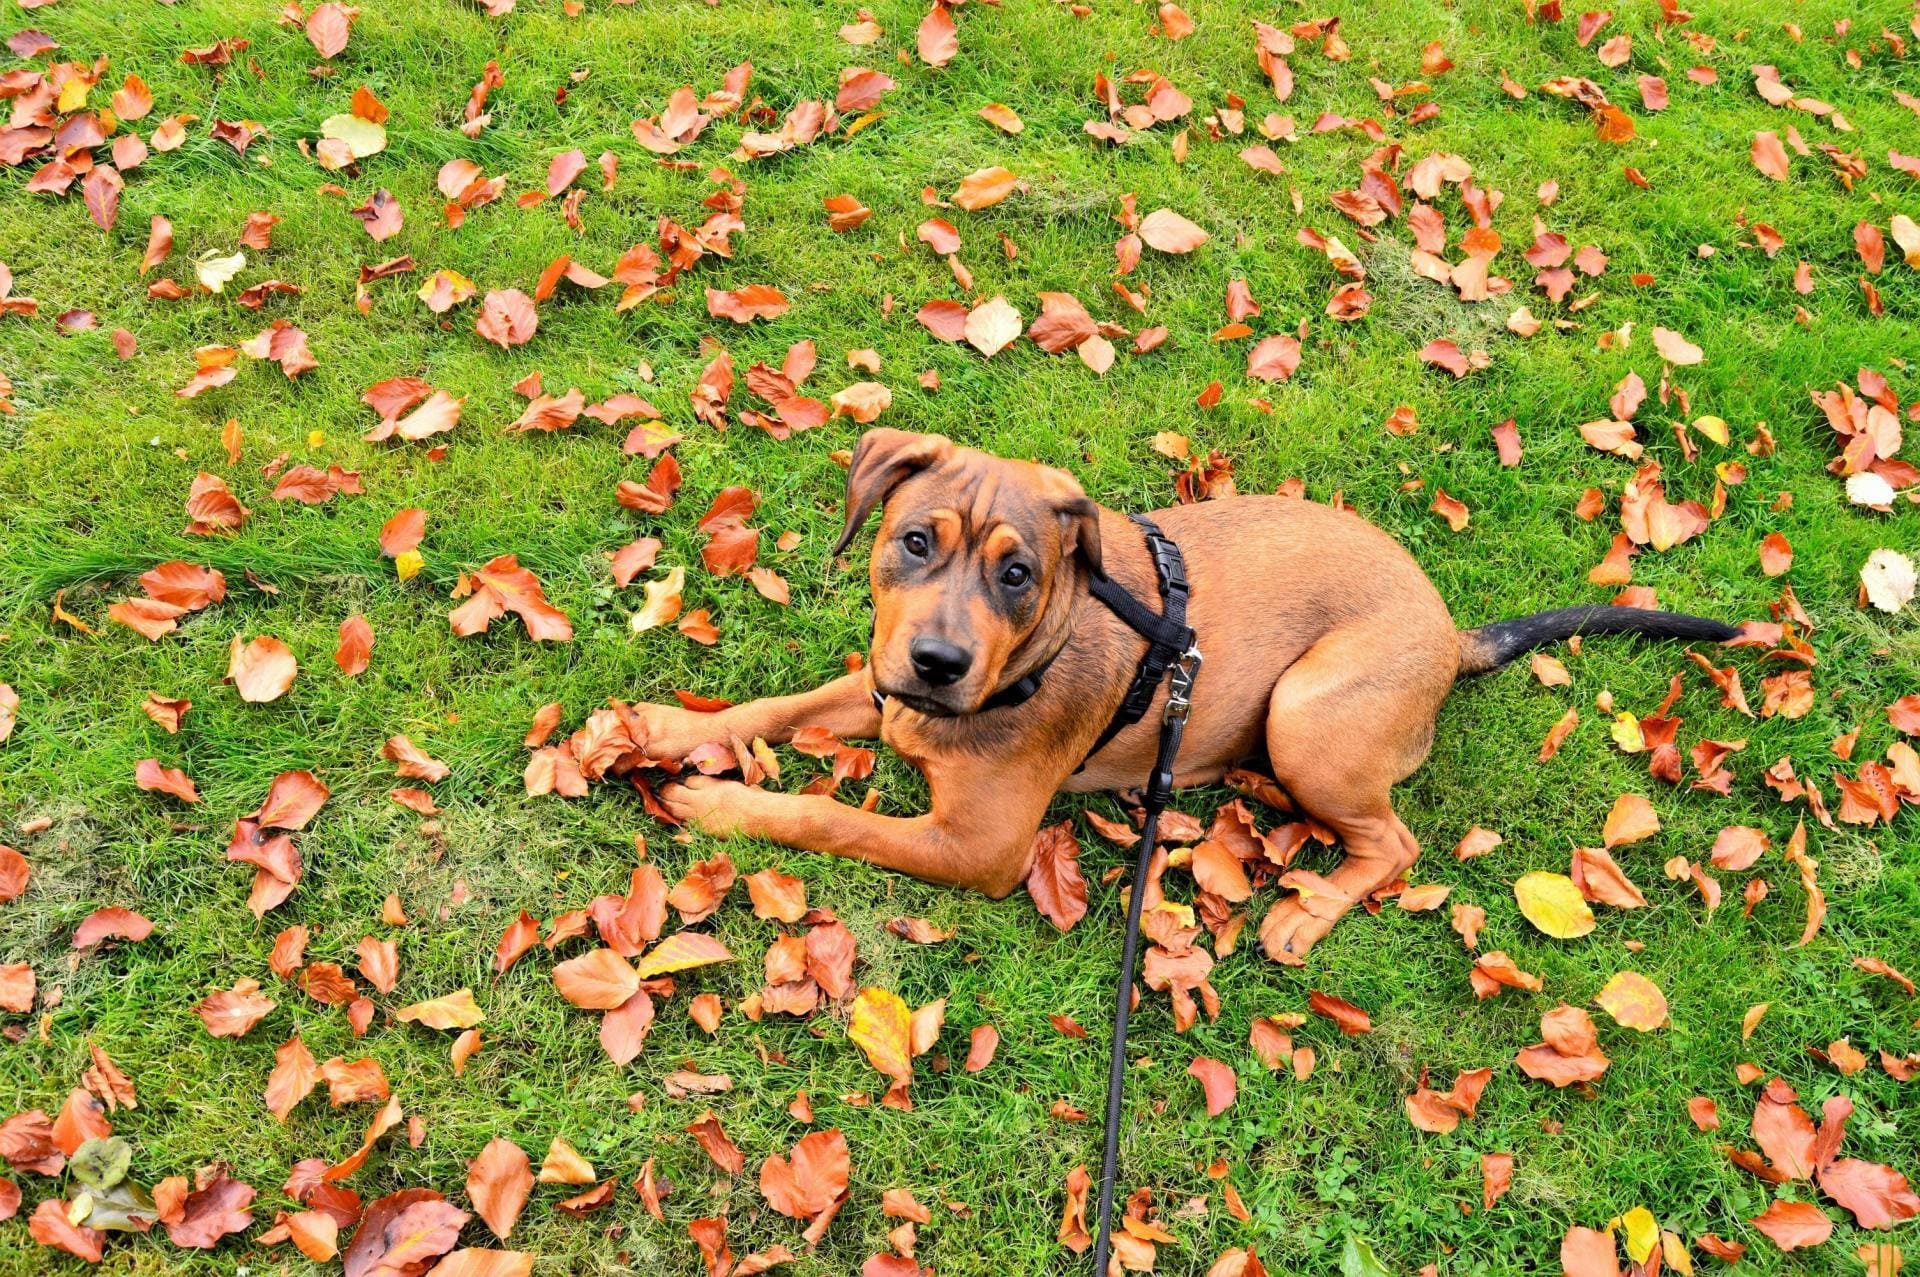 Tan pit-bull terrier laying on the grass with leaves